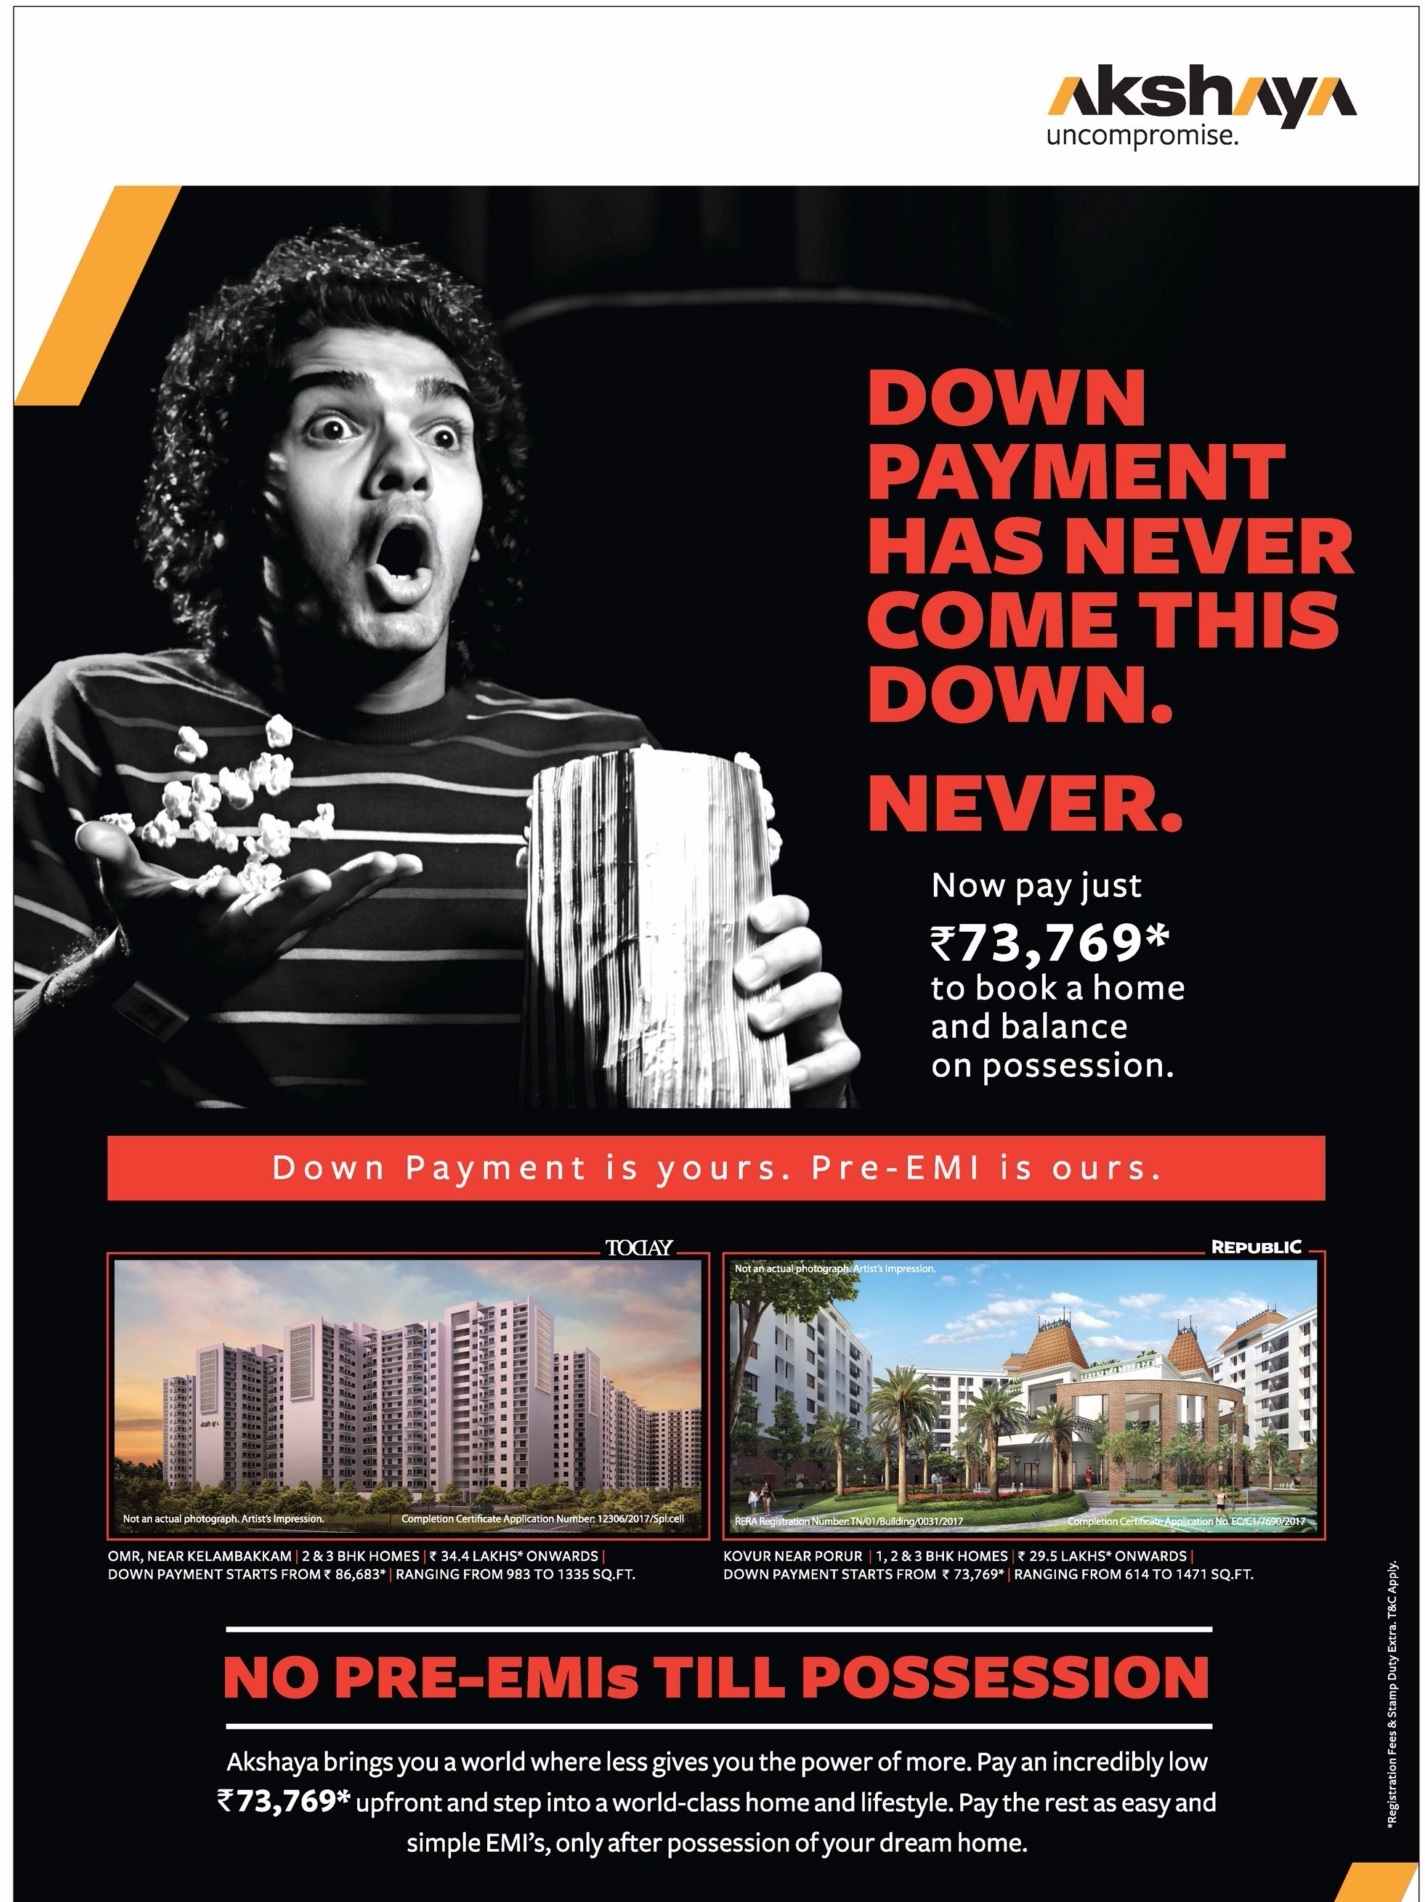 Down payment has never come this down at Akshaya Projects, Chennai Update